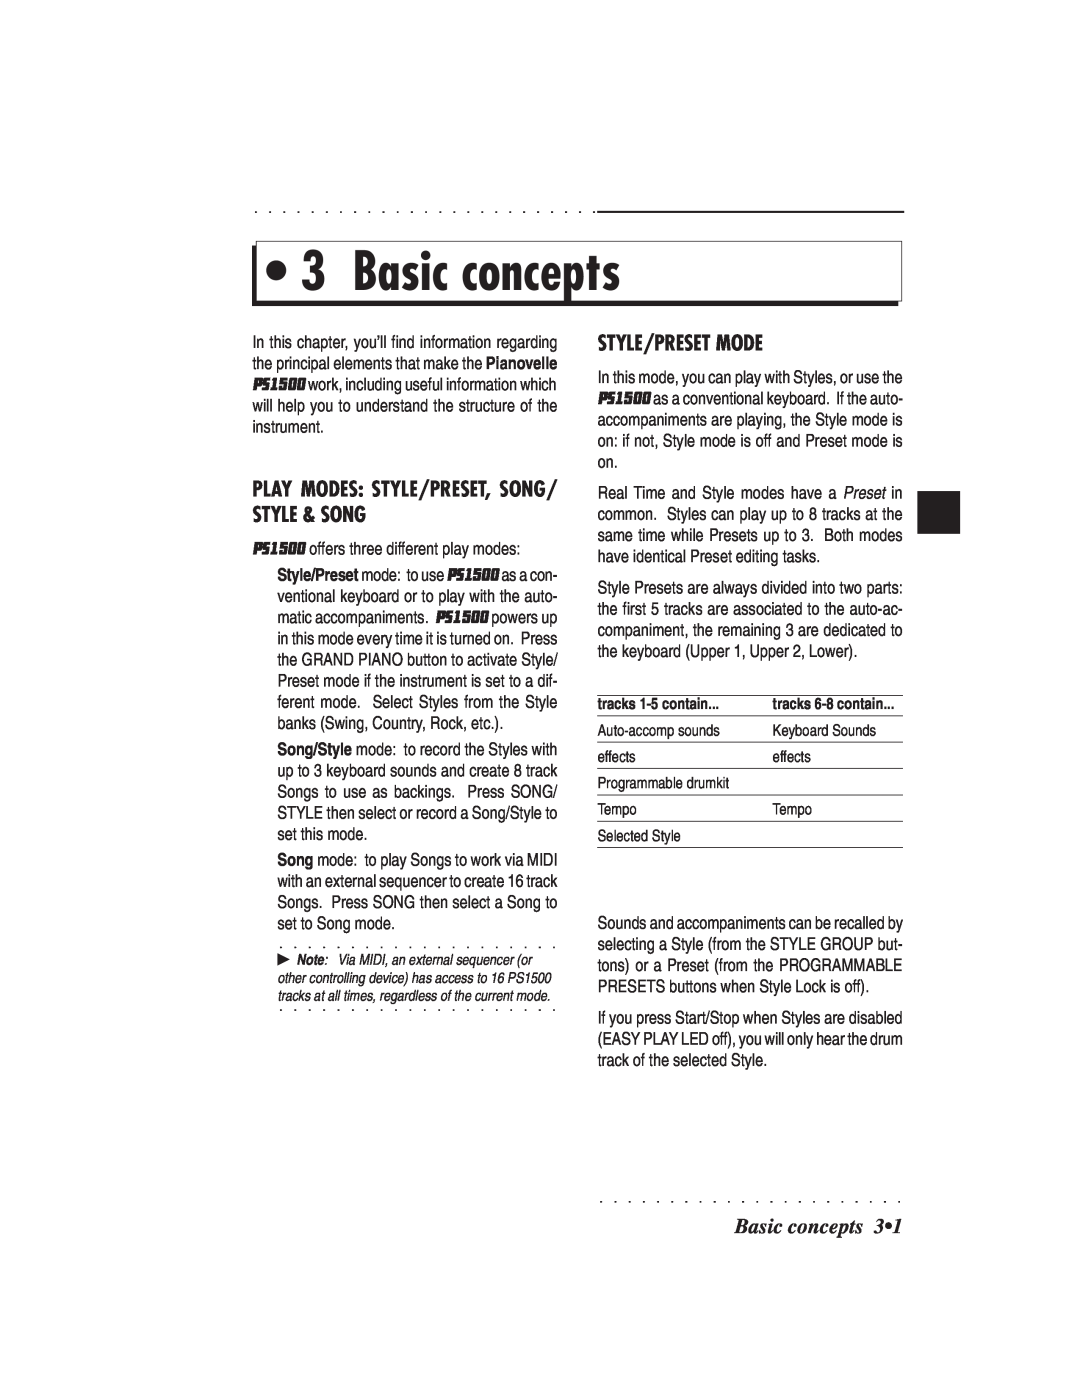 IBM PS1500 Basic concepts, Style/Preset Mode, Play Modes Style/Preset, Song/ Style & Song, tracks 1-5contain, effects 